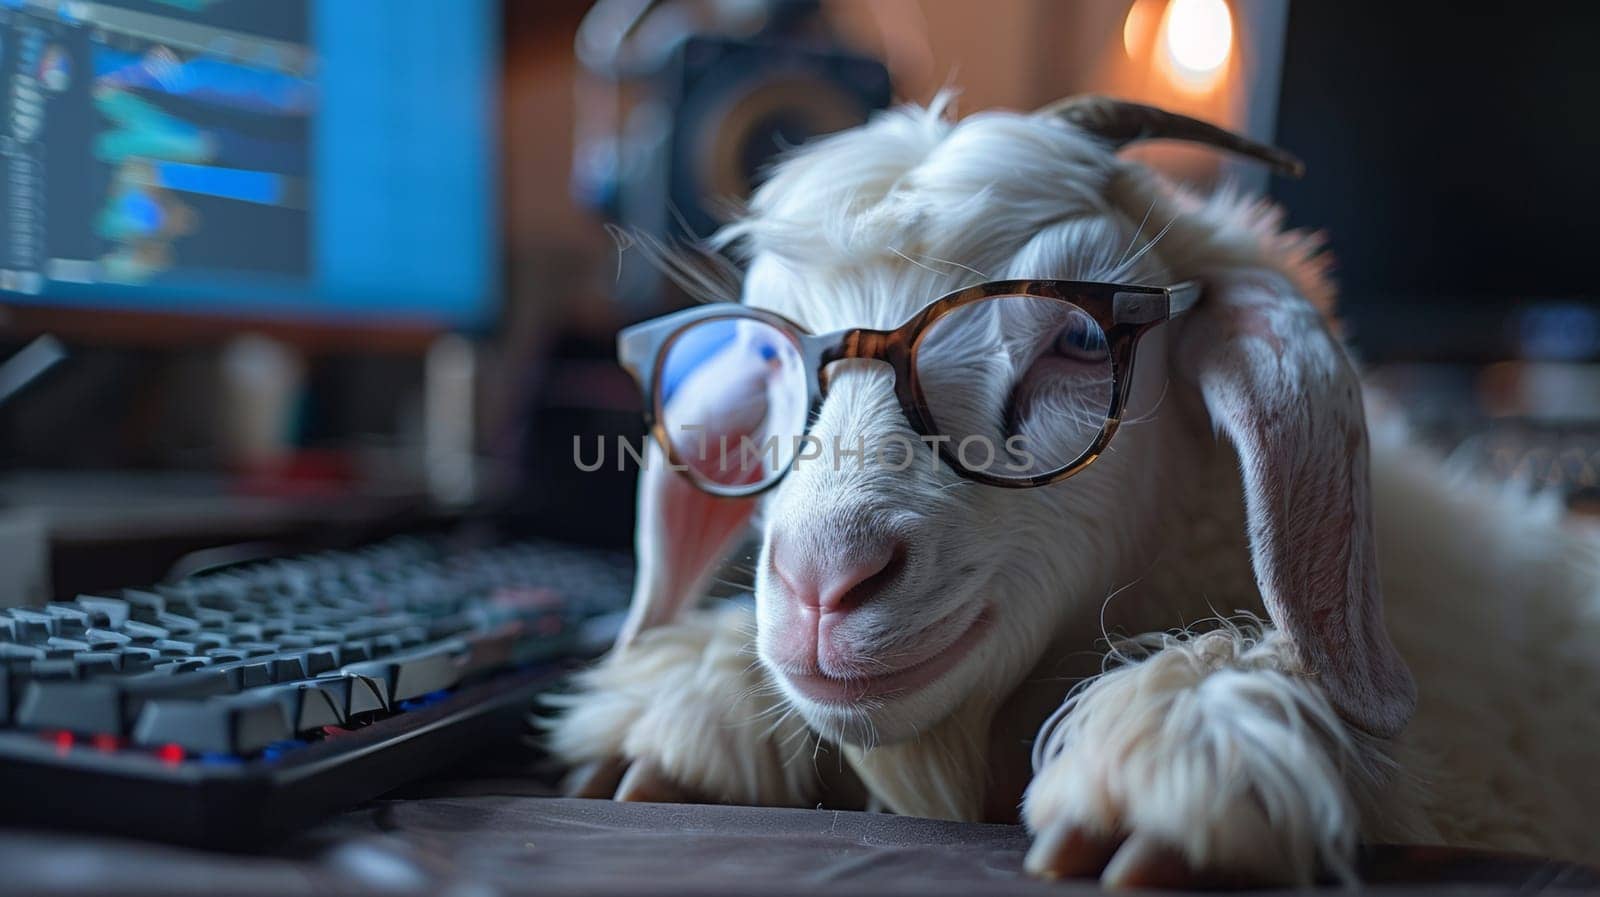 A goat wearing glasses and sitting next to a keyboard, AI by starush